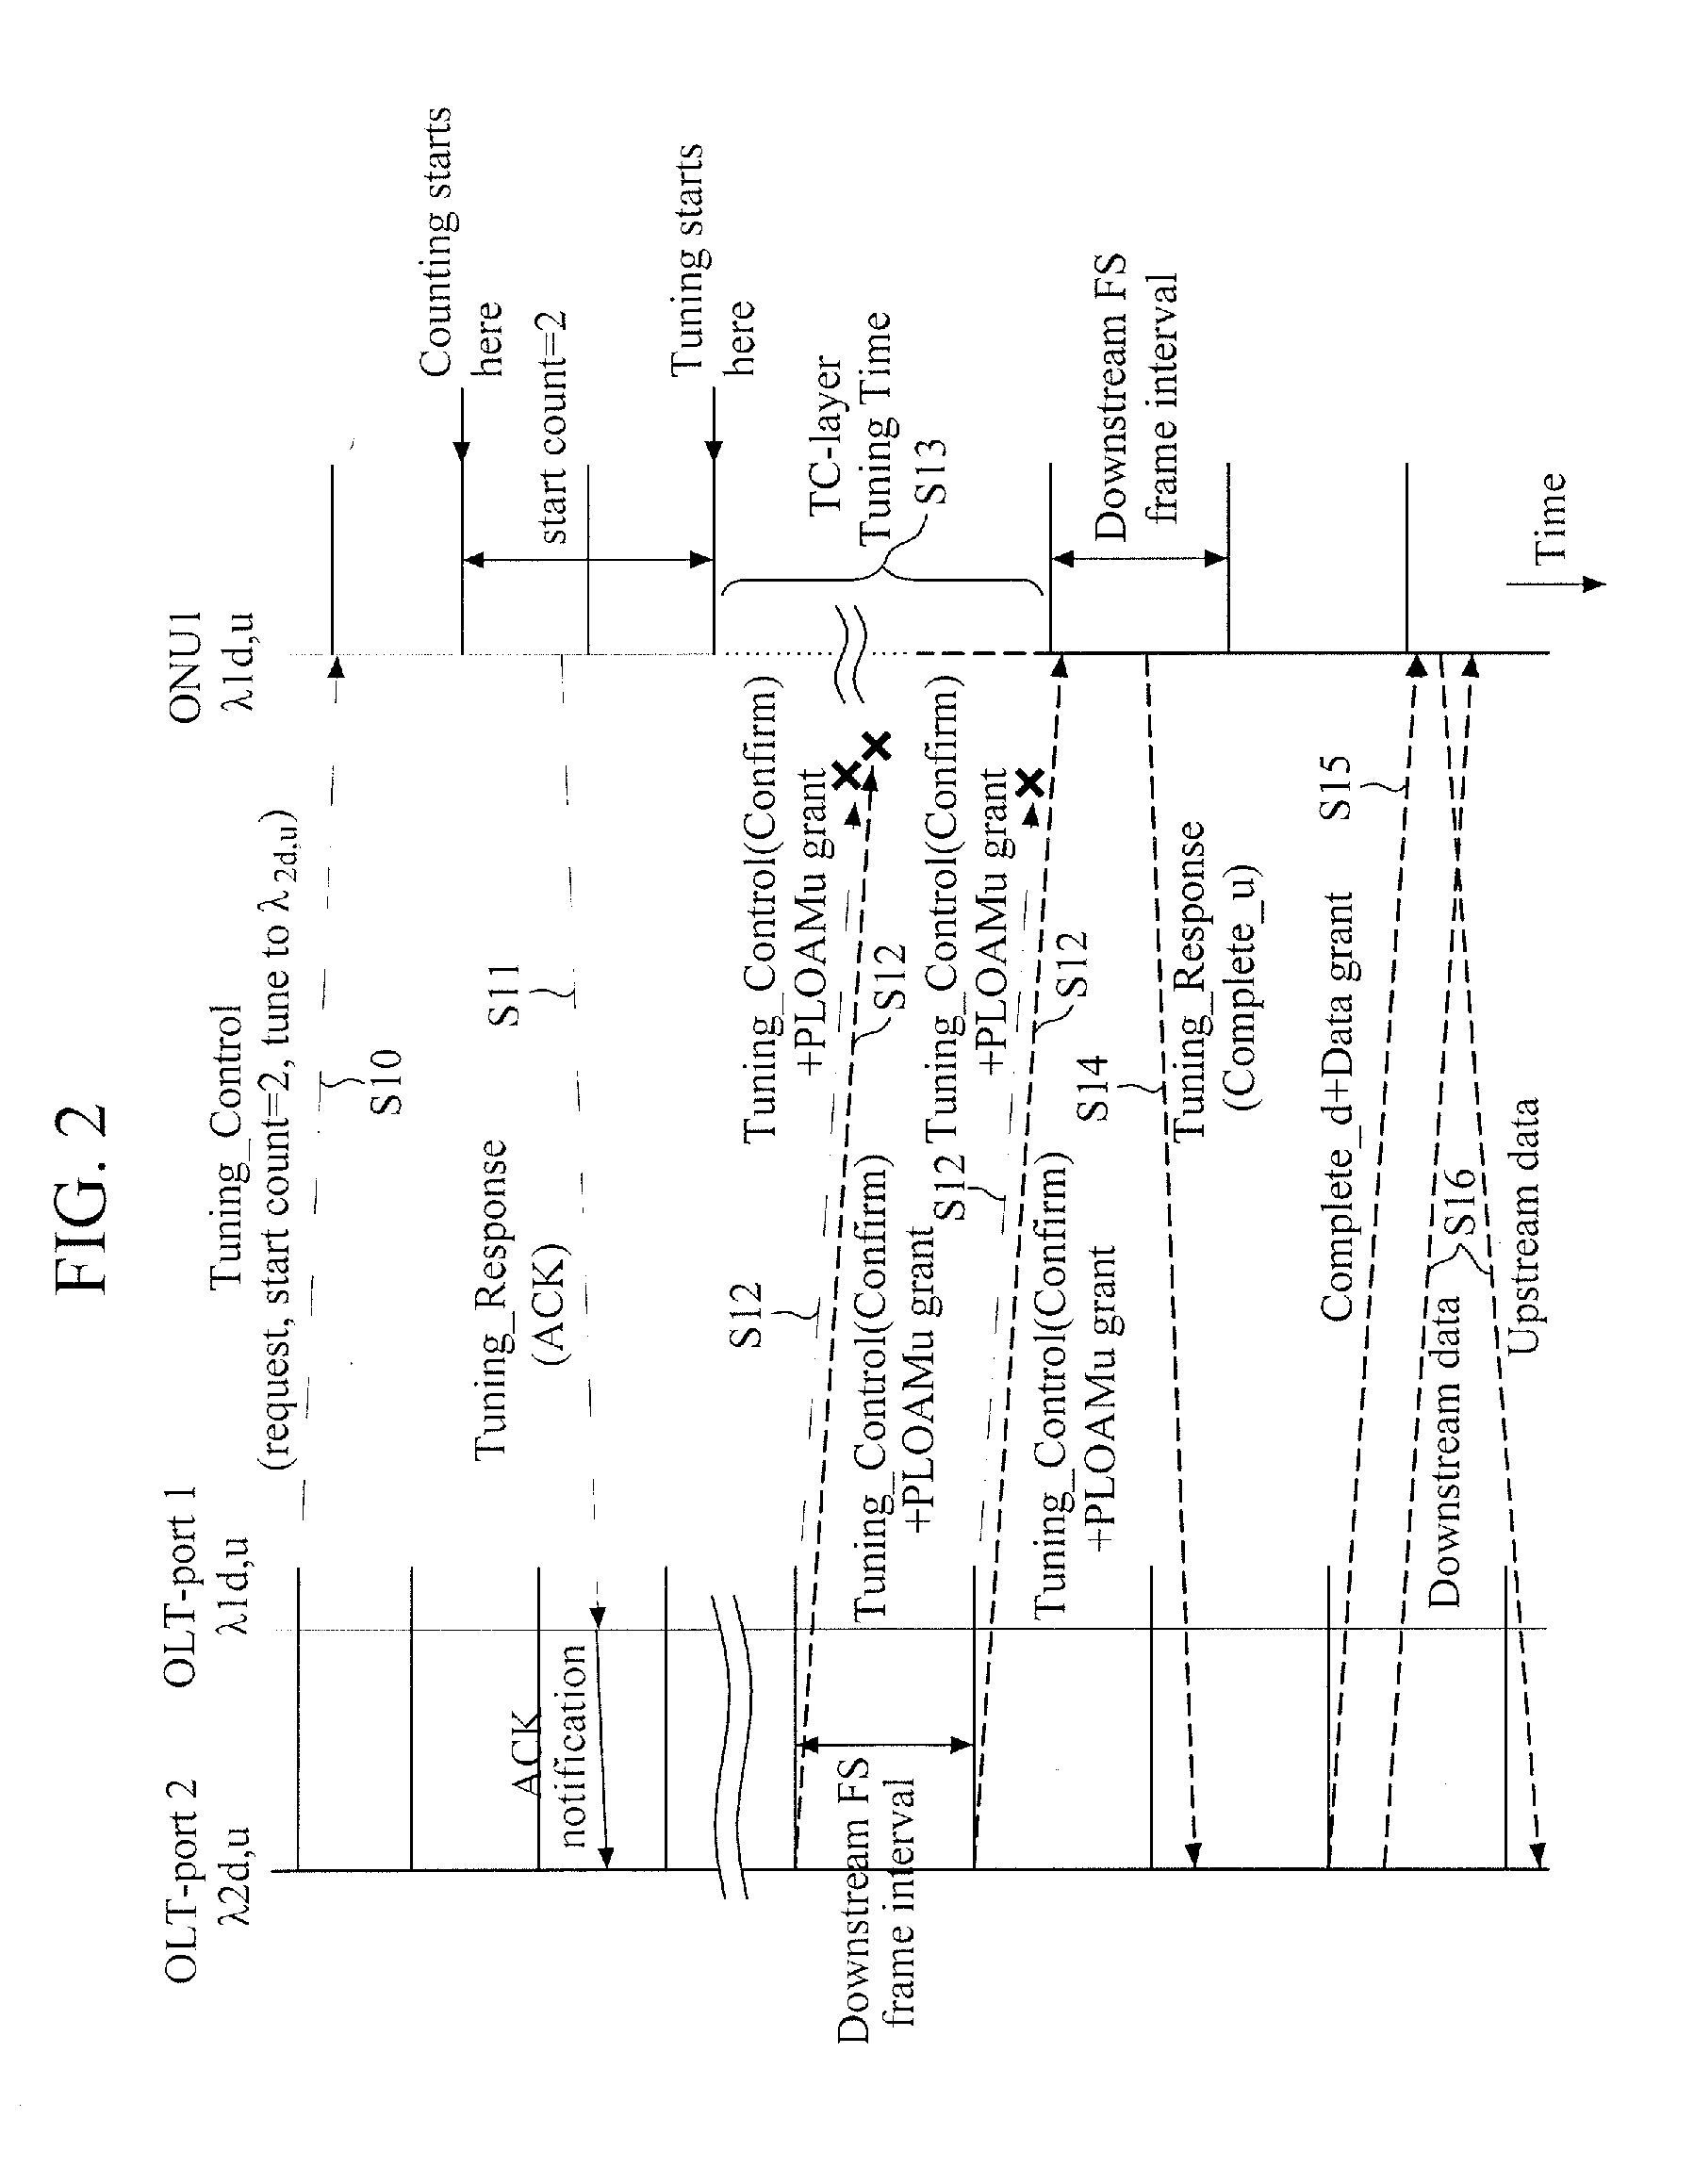 Method of tuning wavelength of tunable optical network unit (ONU) in time and wavelength division multiplexing-passive optical network (TWDM-pon)